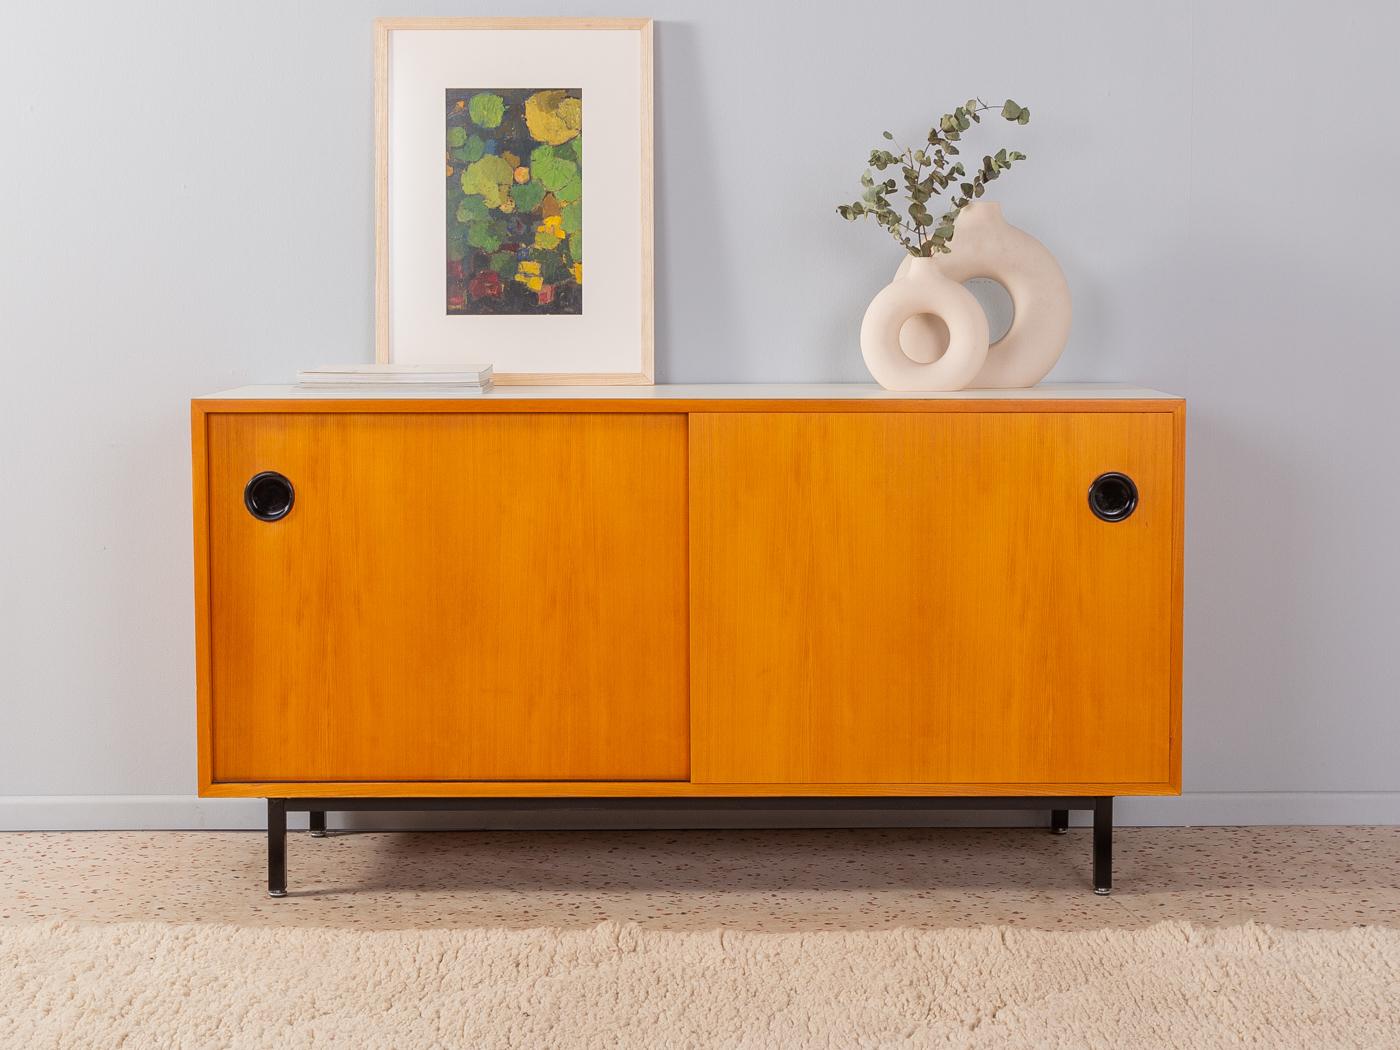 Rare sideboard from the 1950s by Erich Stratmann for Oldenburger Möbelwerkstätten. Corpus in ash veneer with two sliding doors, two shelves and new squared steel feet in black. The top is coated with creamy white formica.

Quality Features:
